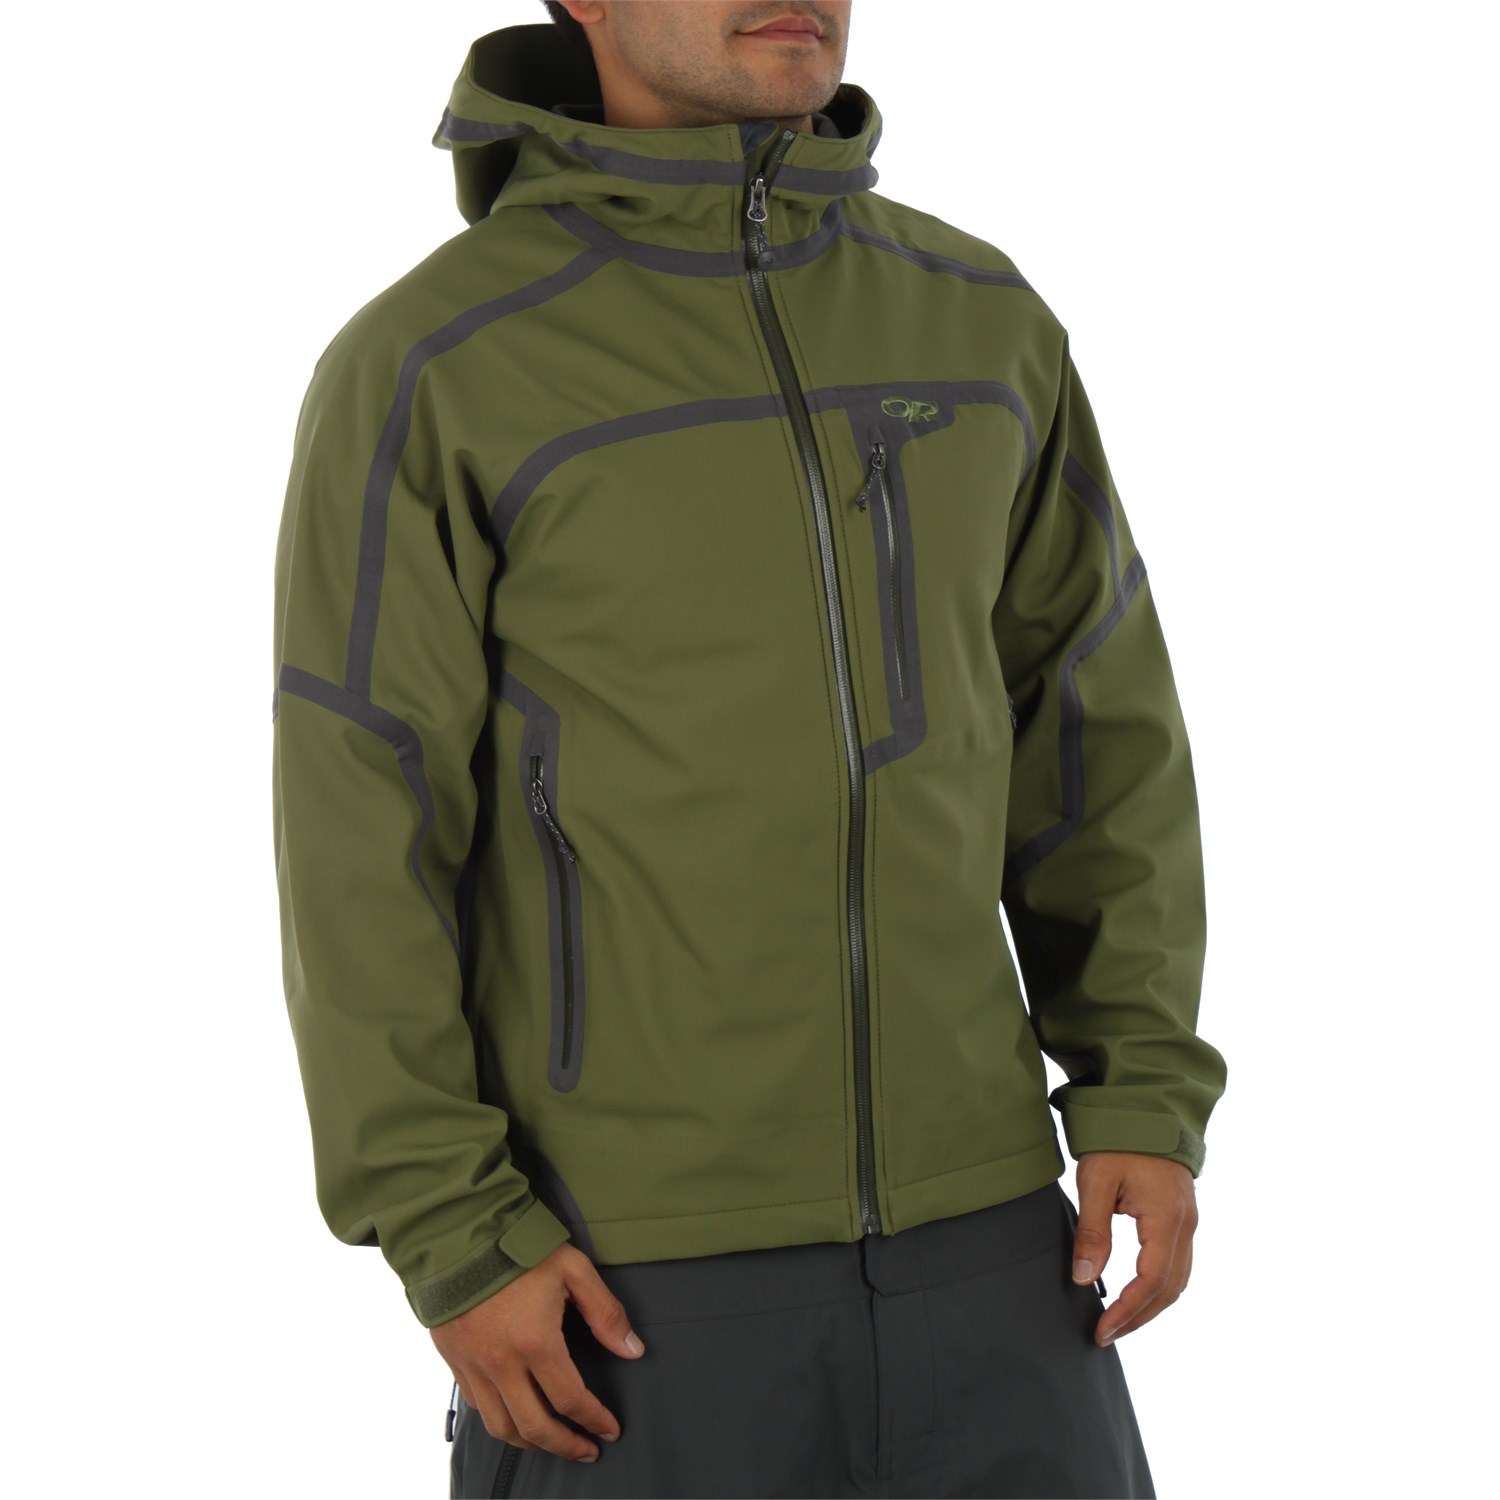 Outdoor Research Mithril Jacket | evo outlet
